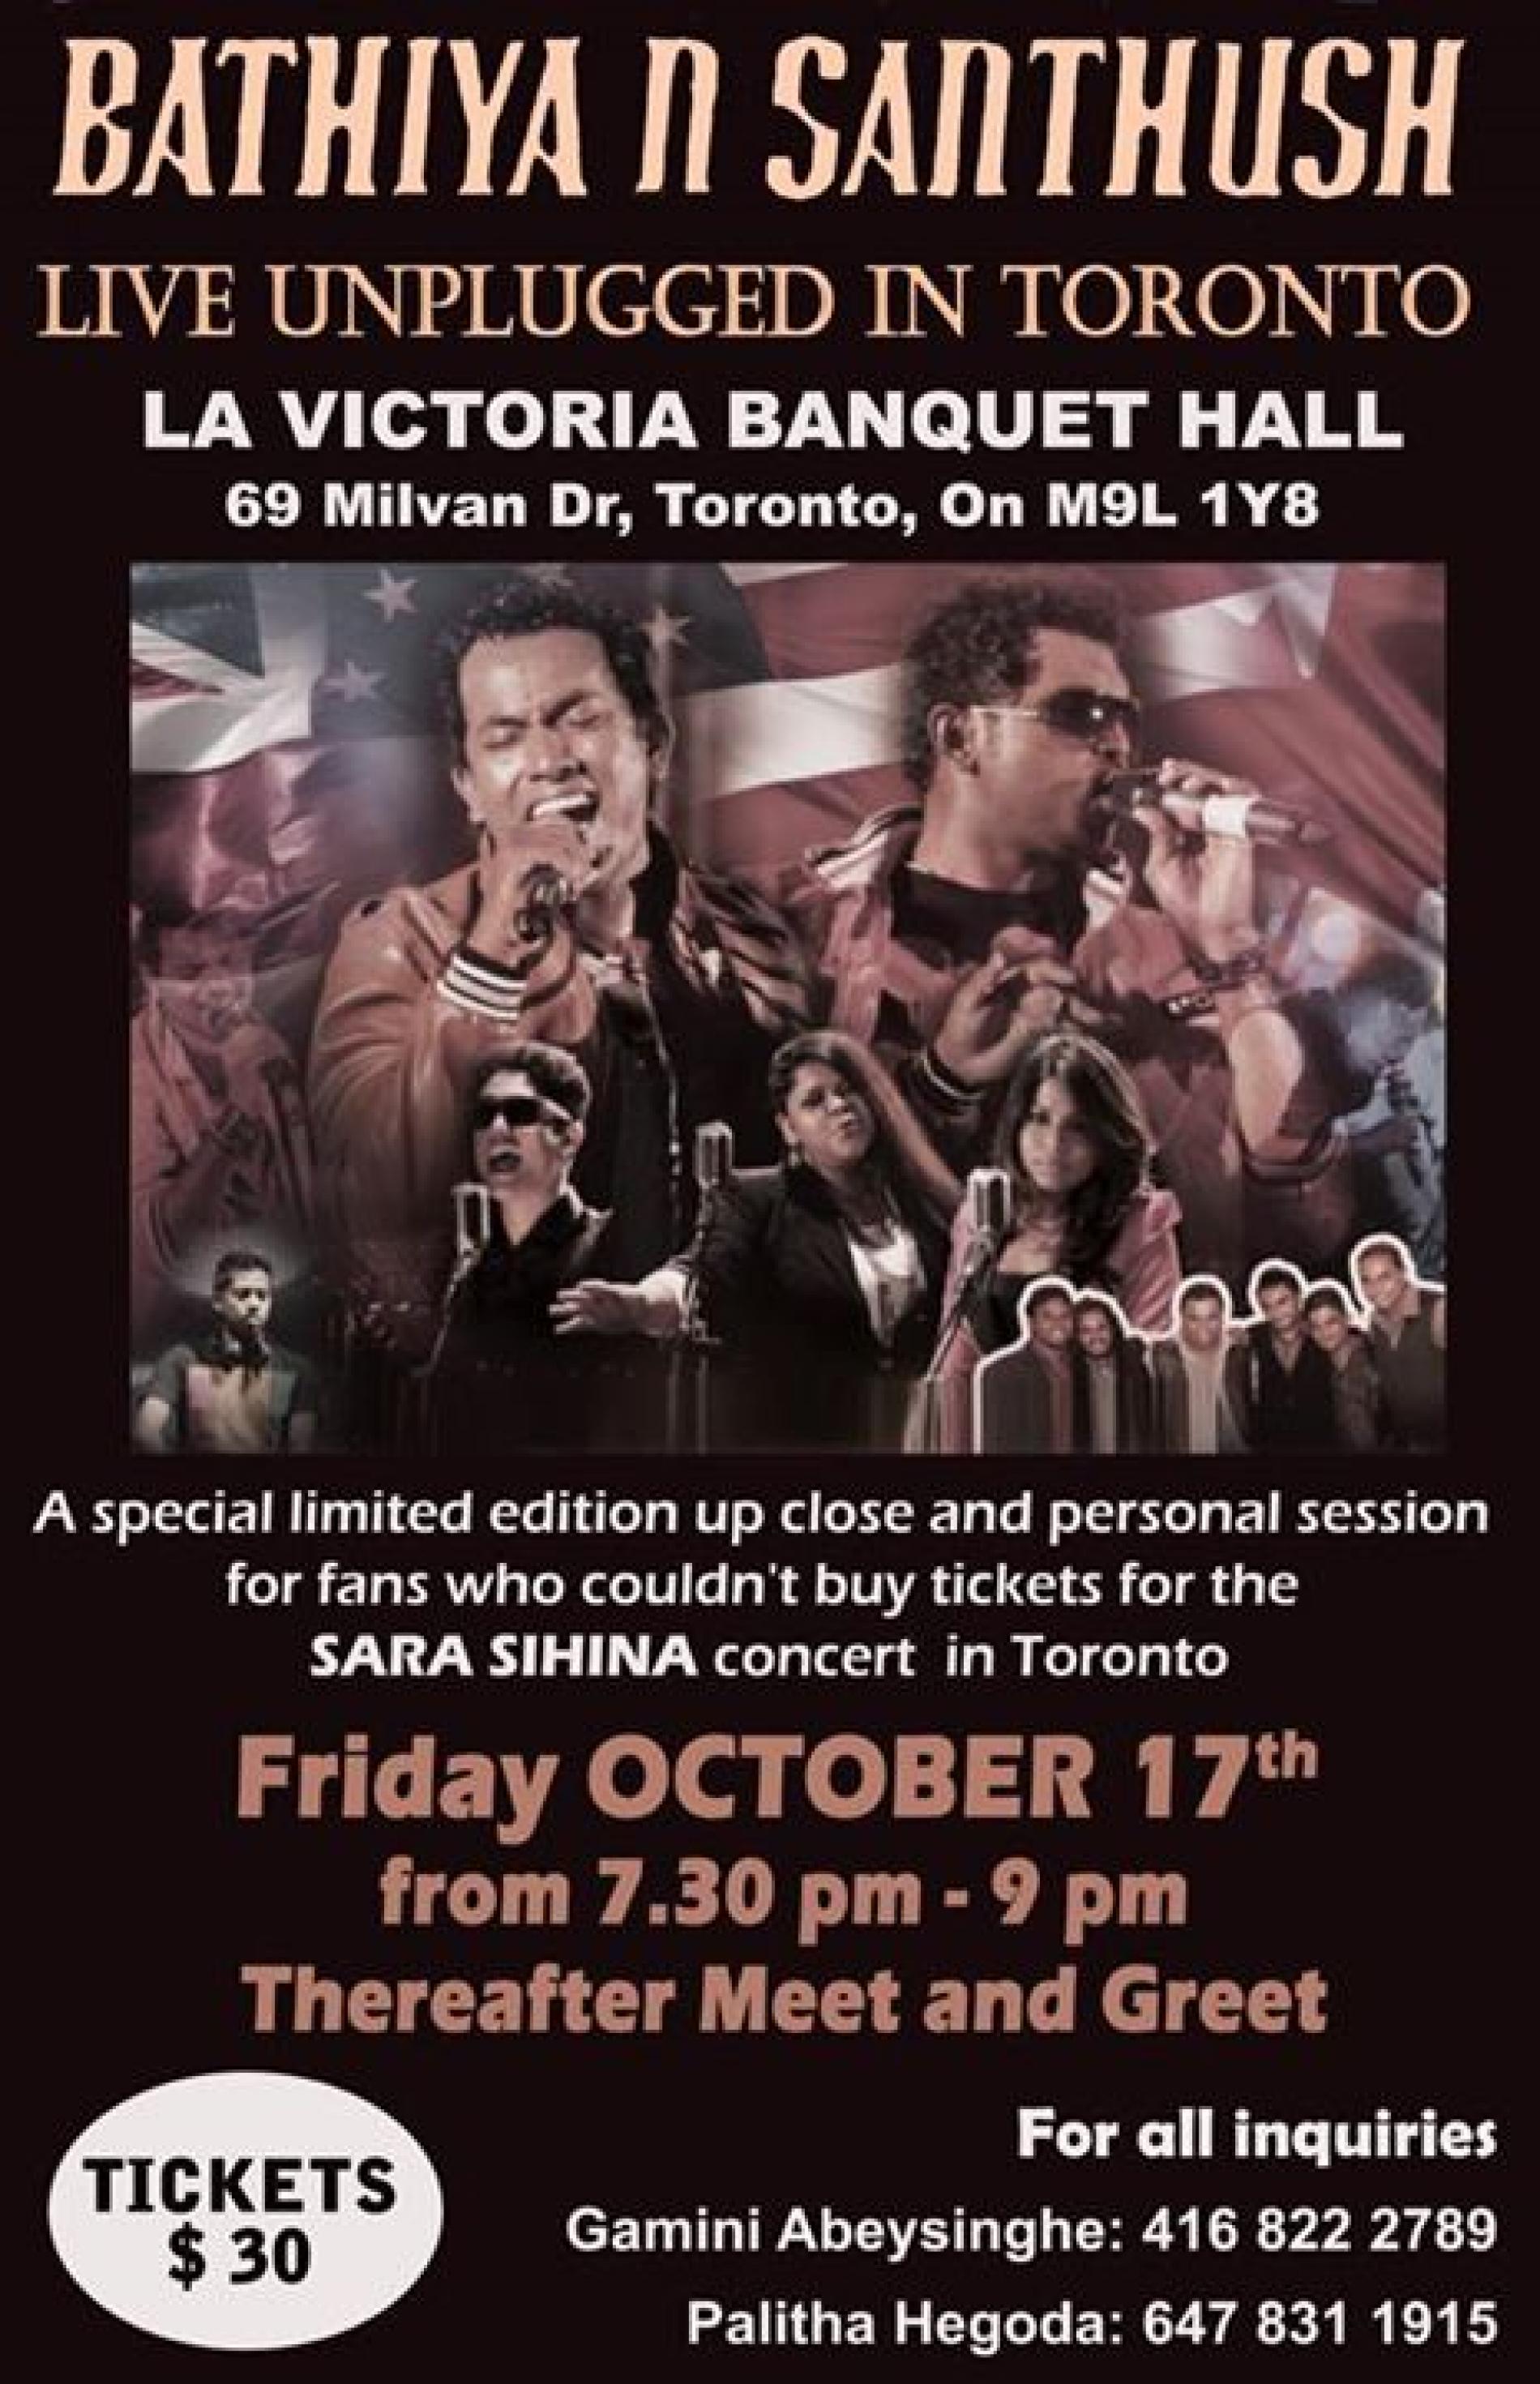 BnS Have A Special Show For Toronto Based Fans